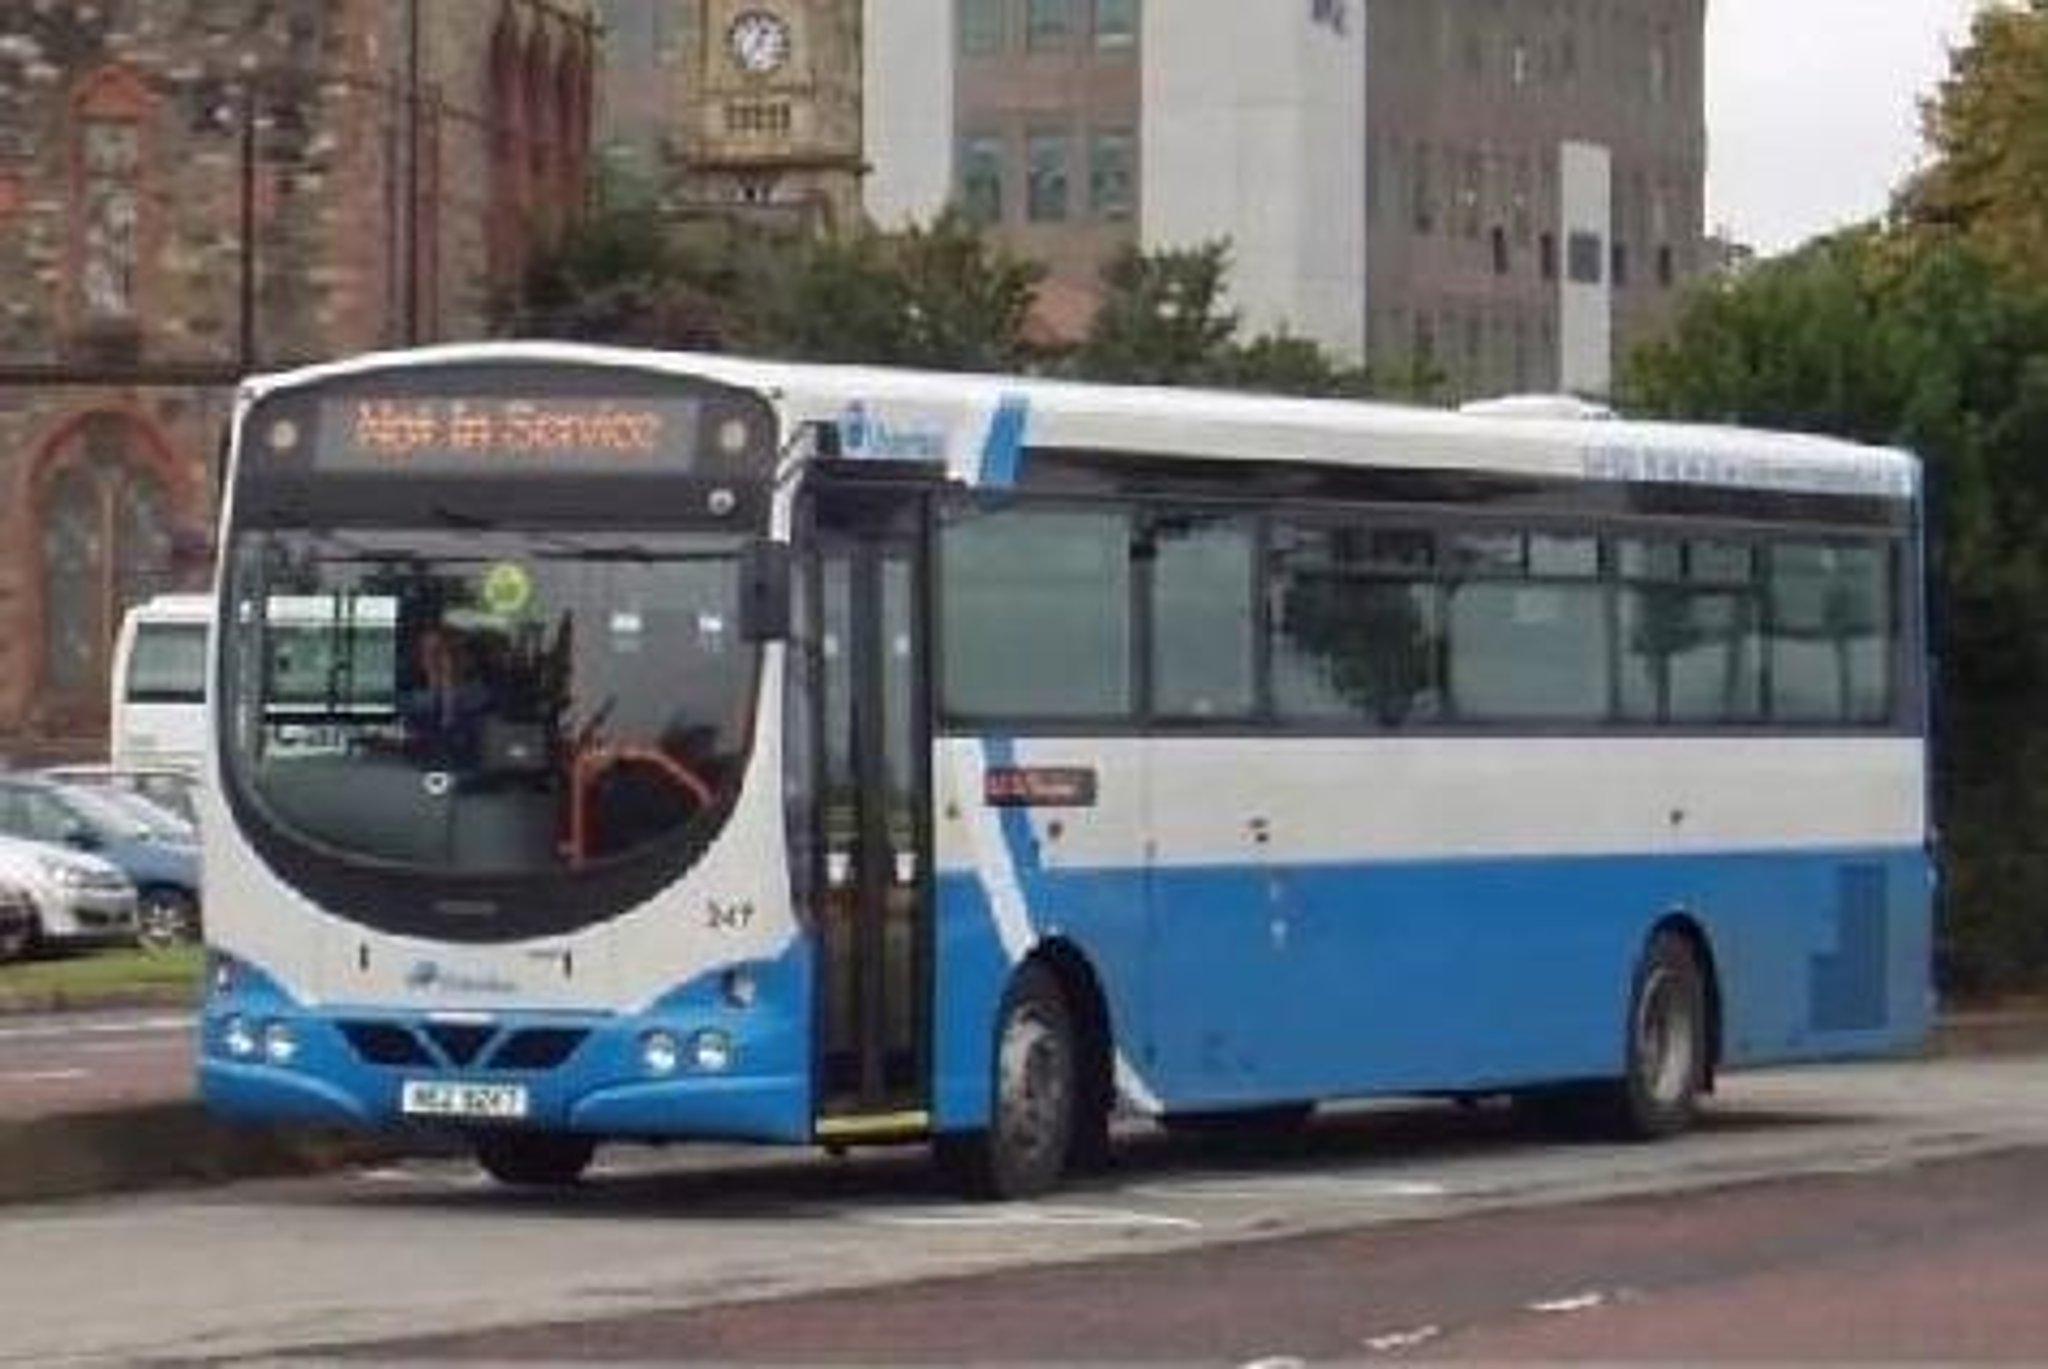 All Translink bus services to be 'paralysed' as drivers vote for industrial action over pay, union announces